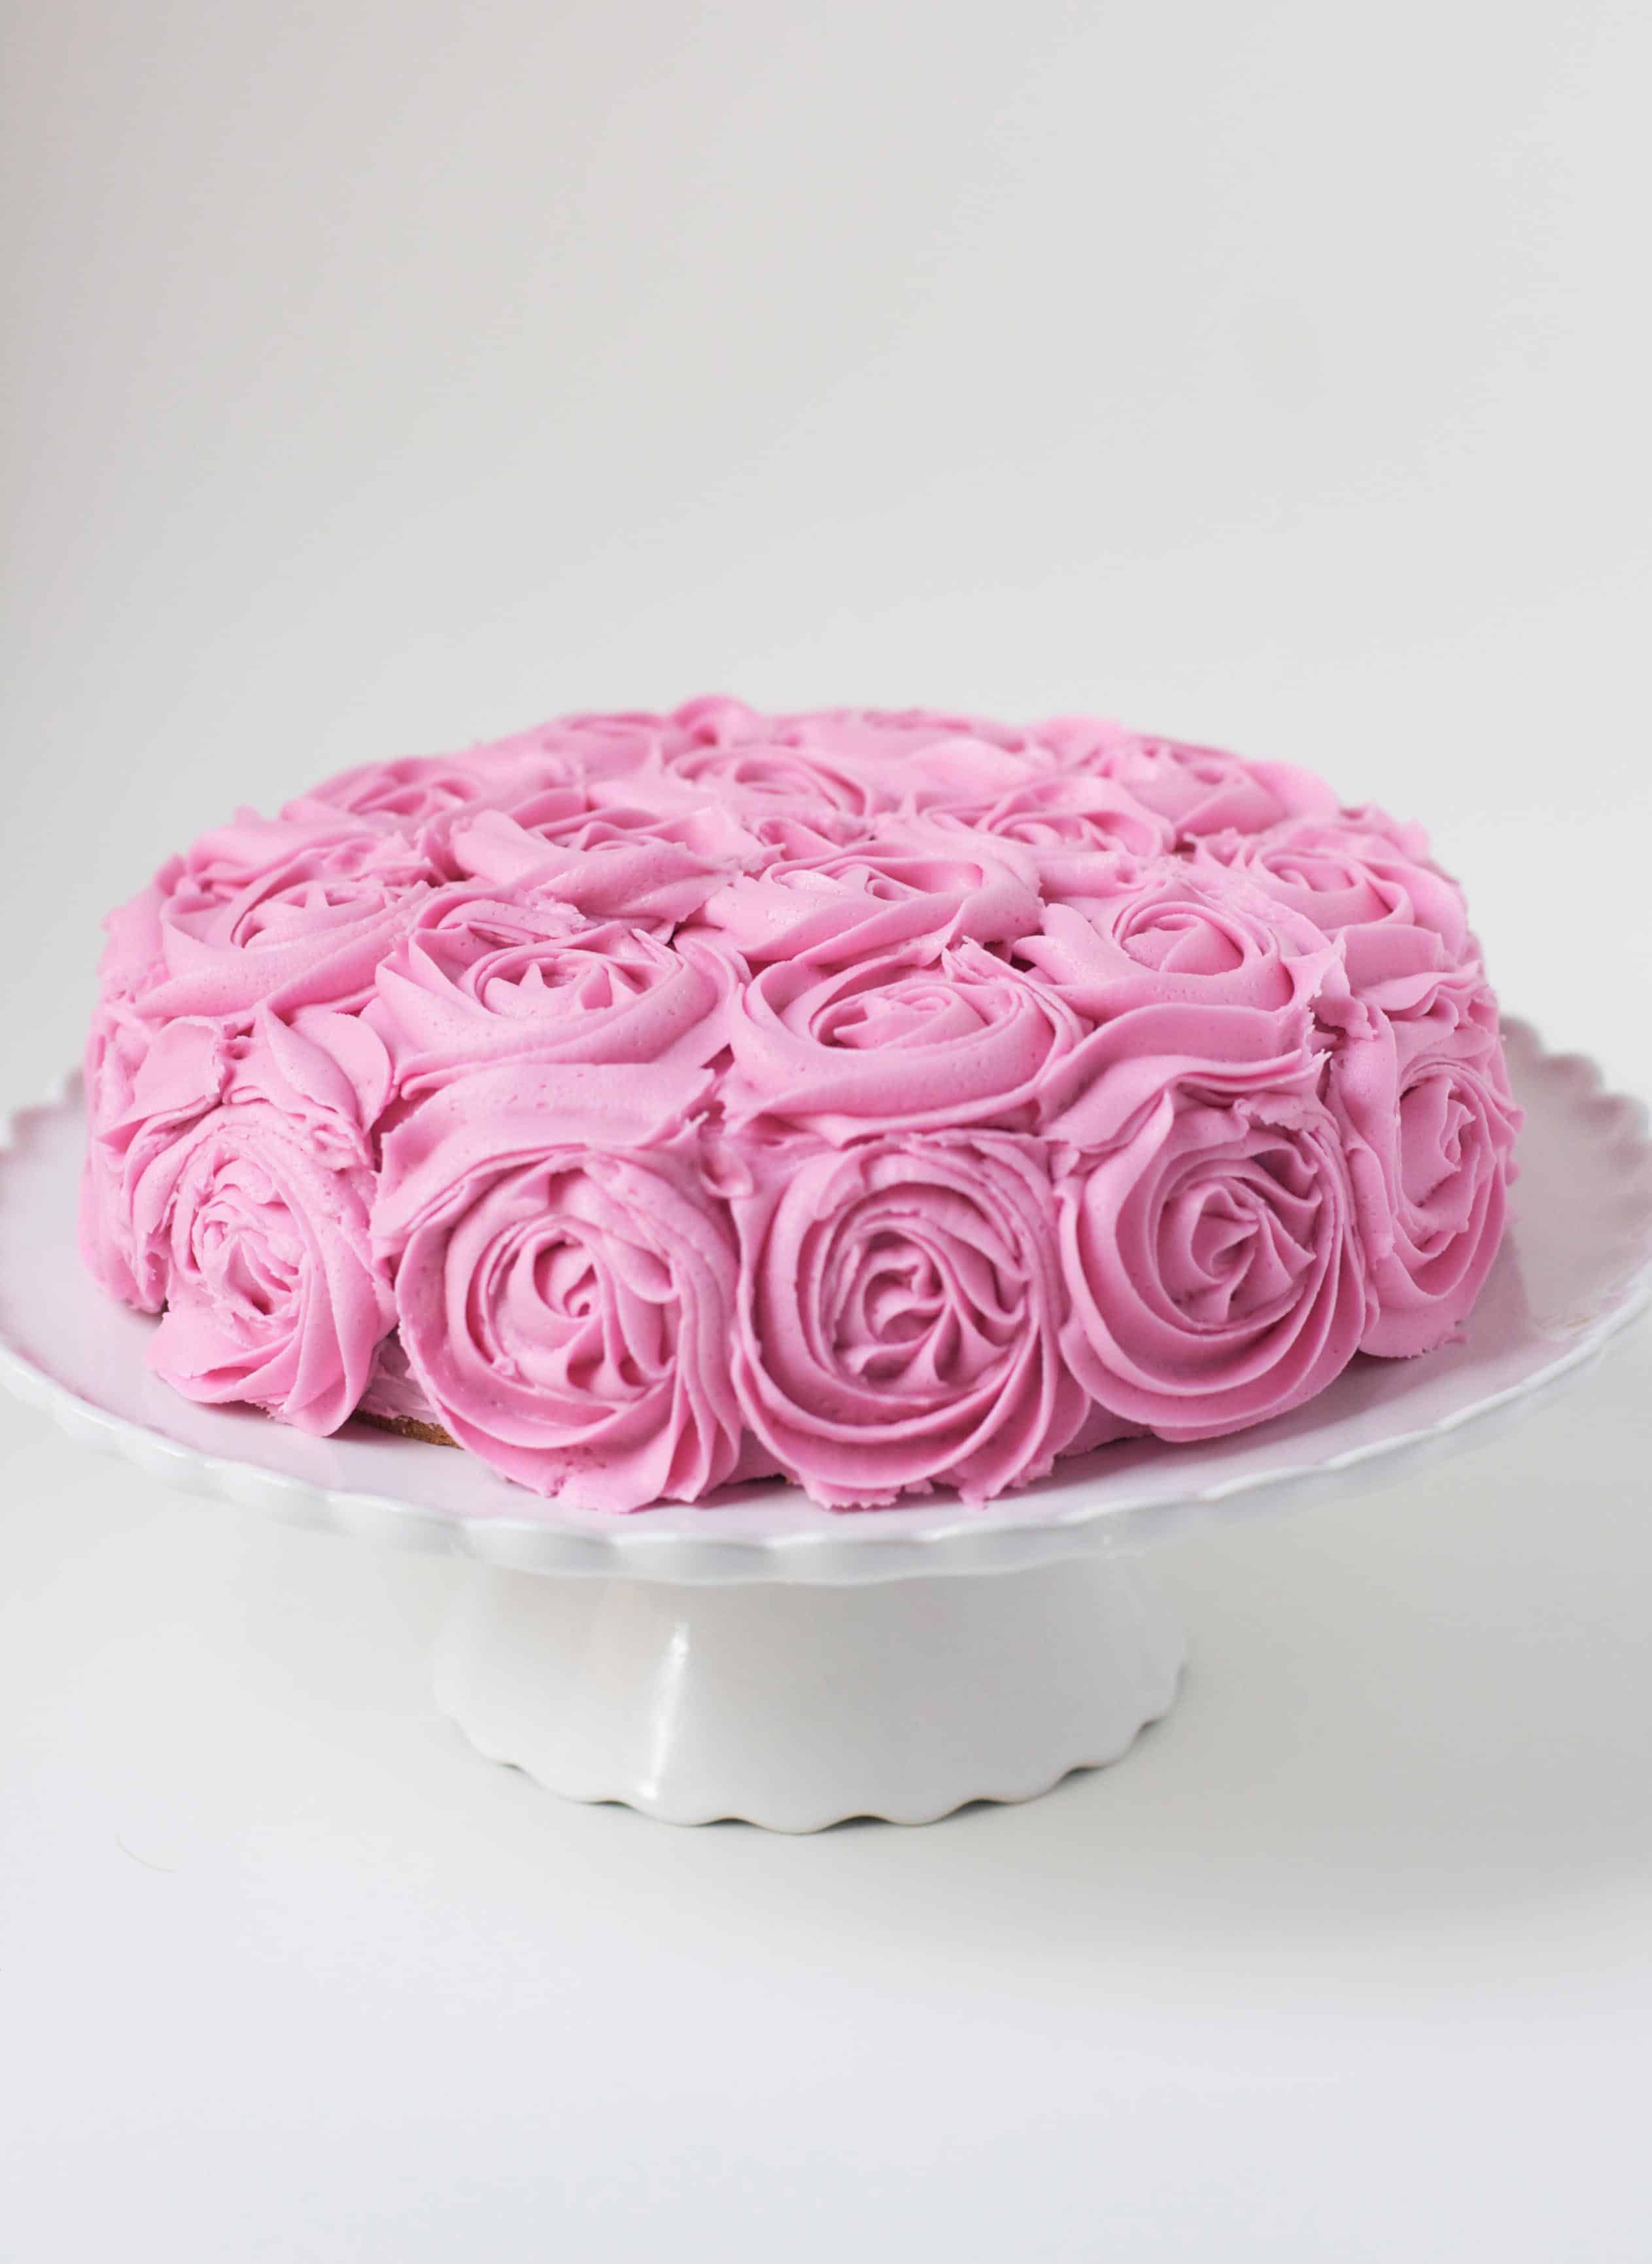 Rose-Frosted Yellow Cake